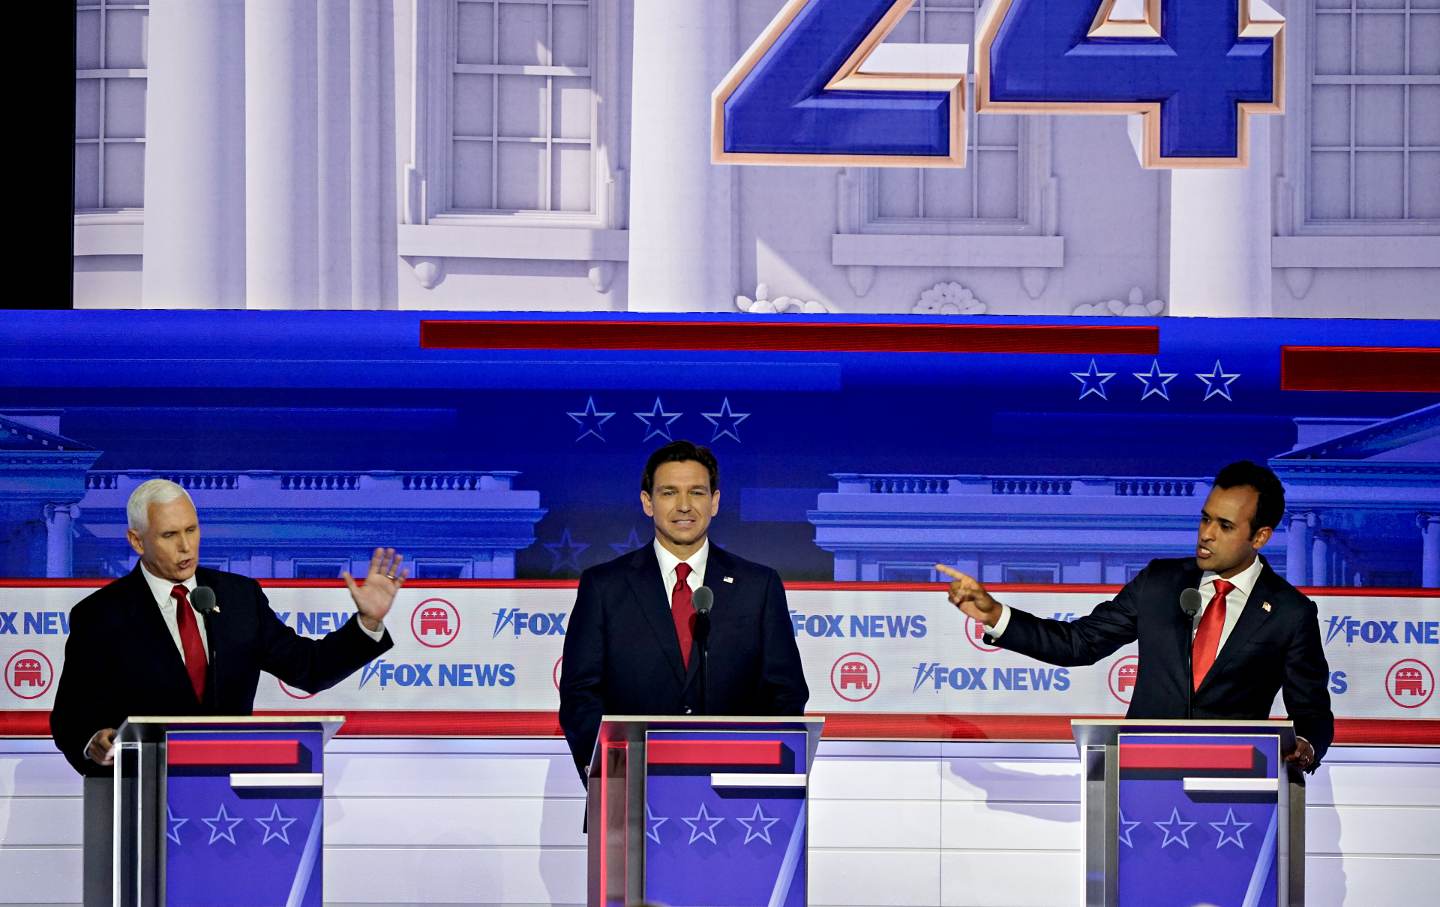 Mike Pence, Ron DeSantis and Vivek Ramaswamy at the first GOP 2024 presidential debate in Milwaukee on August 23, 2023.